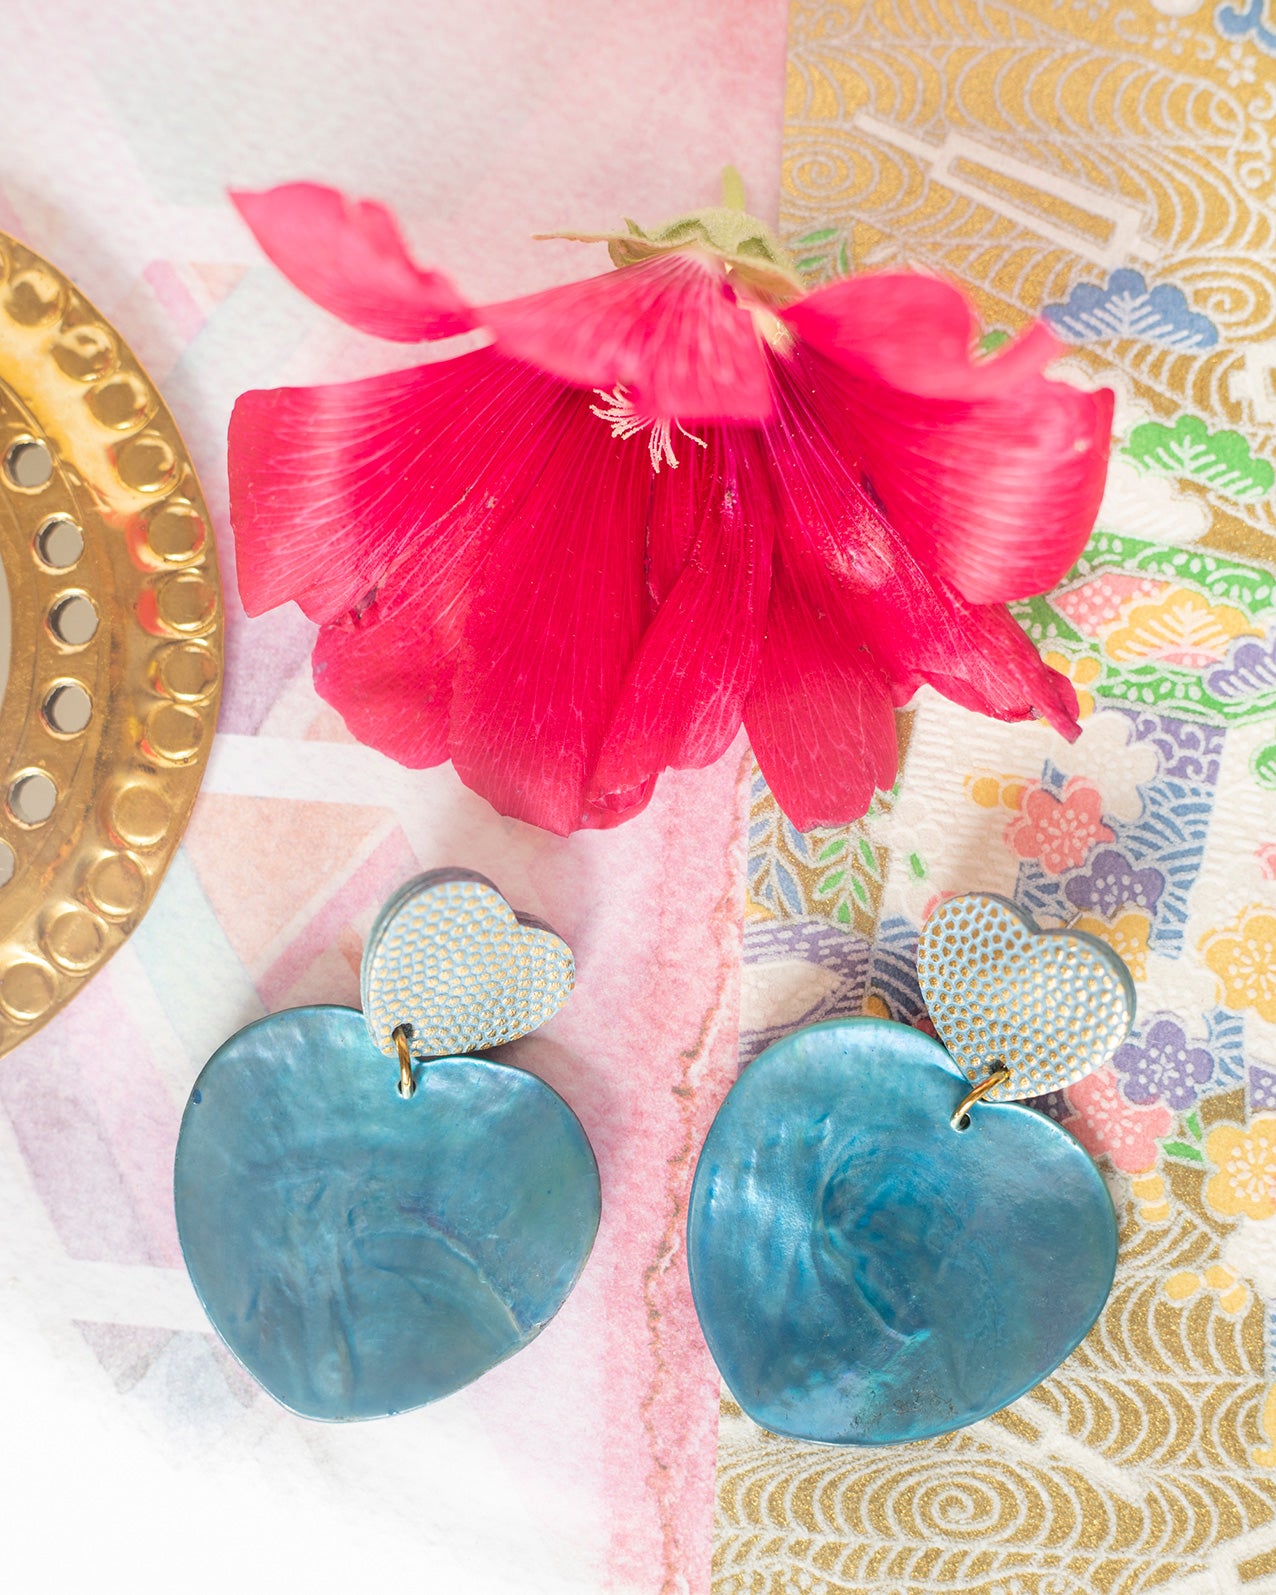 Double Hearts earrings in blue leather with gold polka dots and blue mother-of-pearl hearts